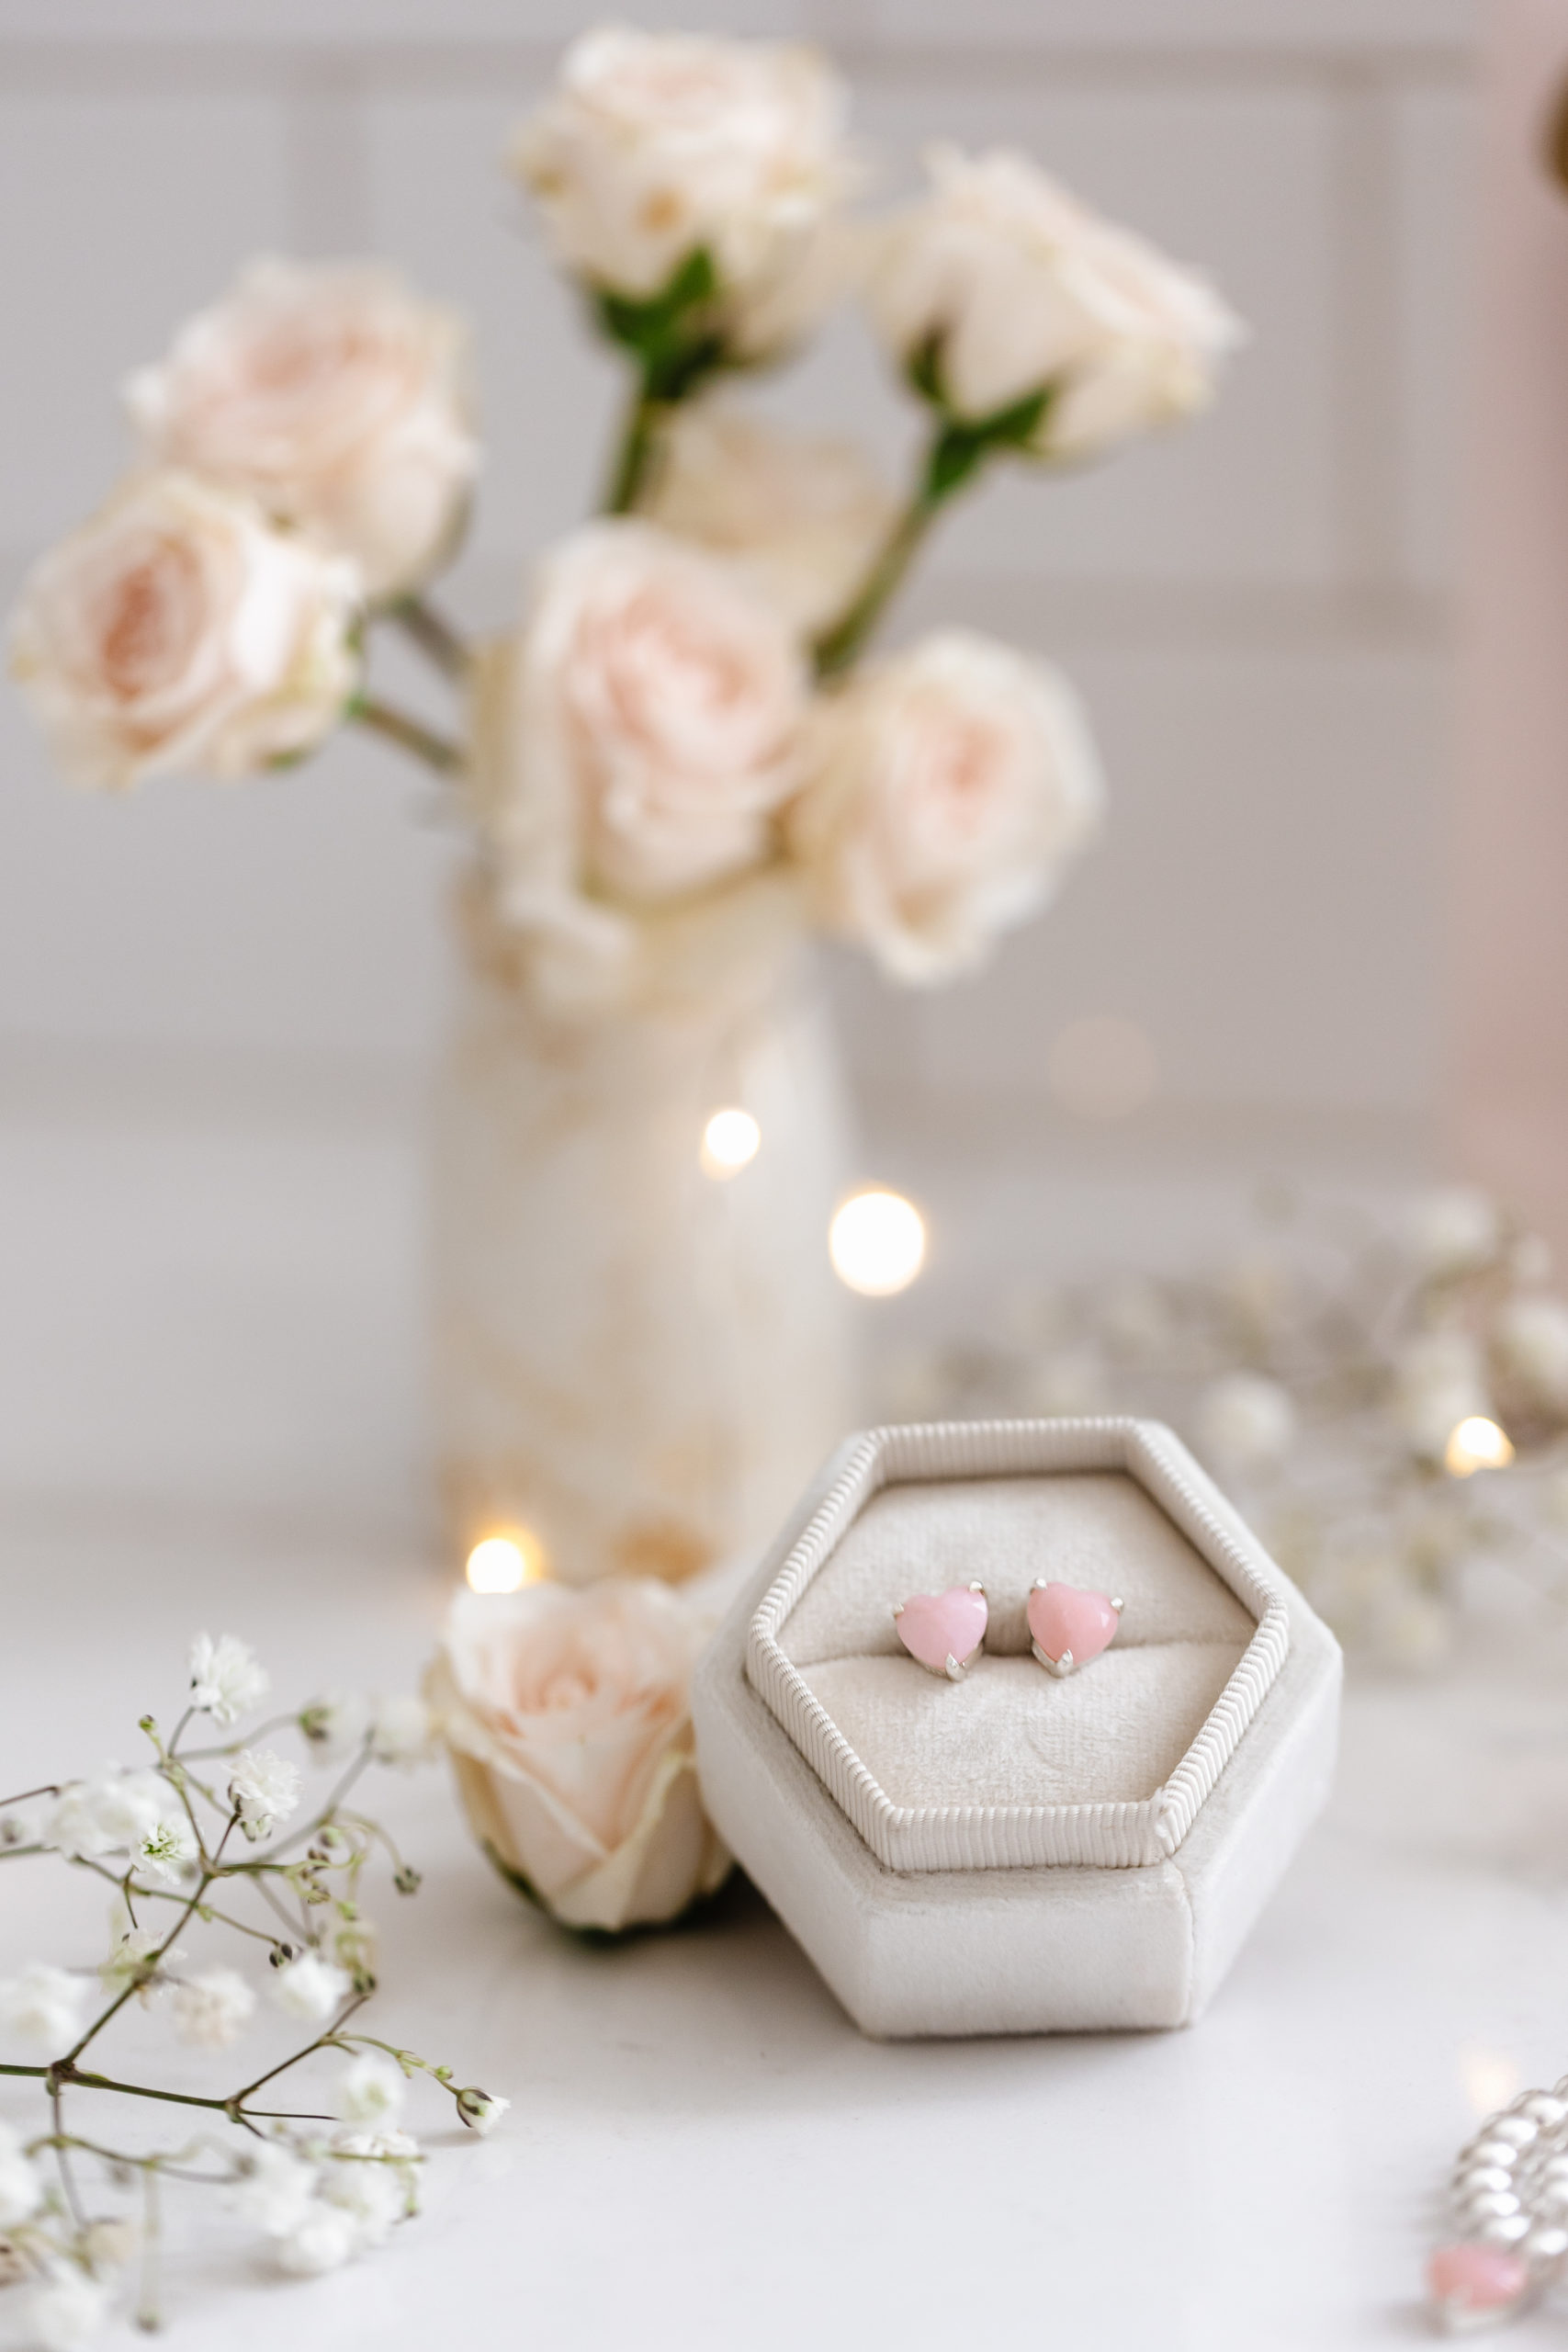 pink heart earrings in a box beside a vase of roses